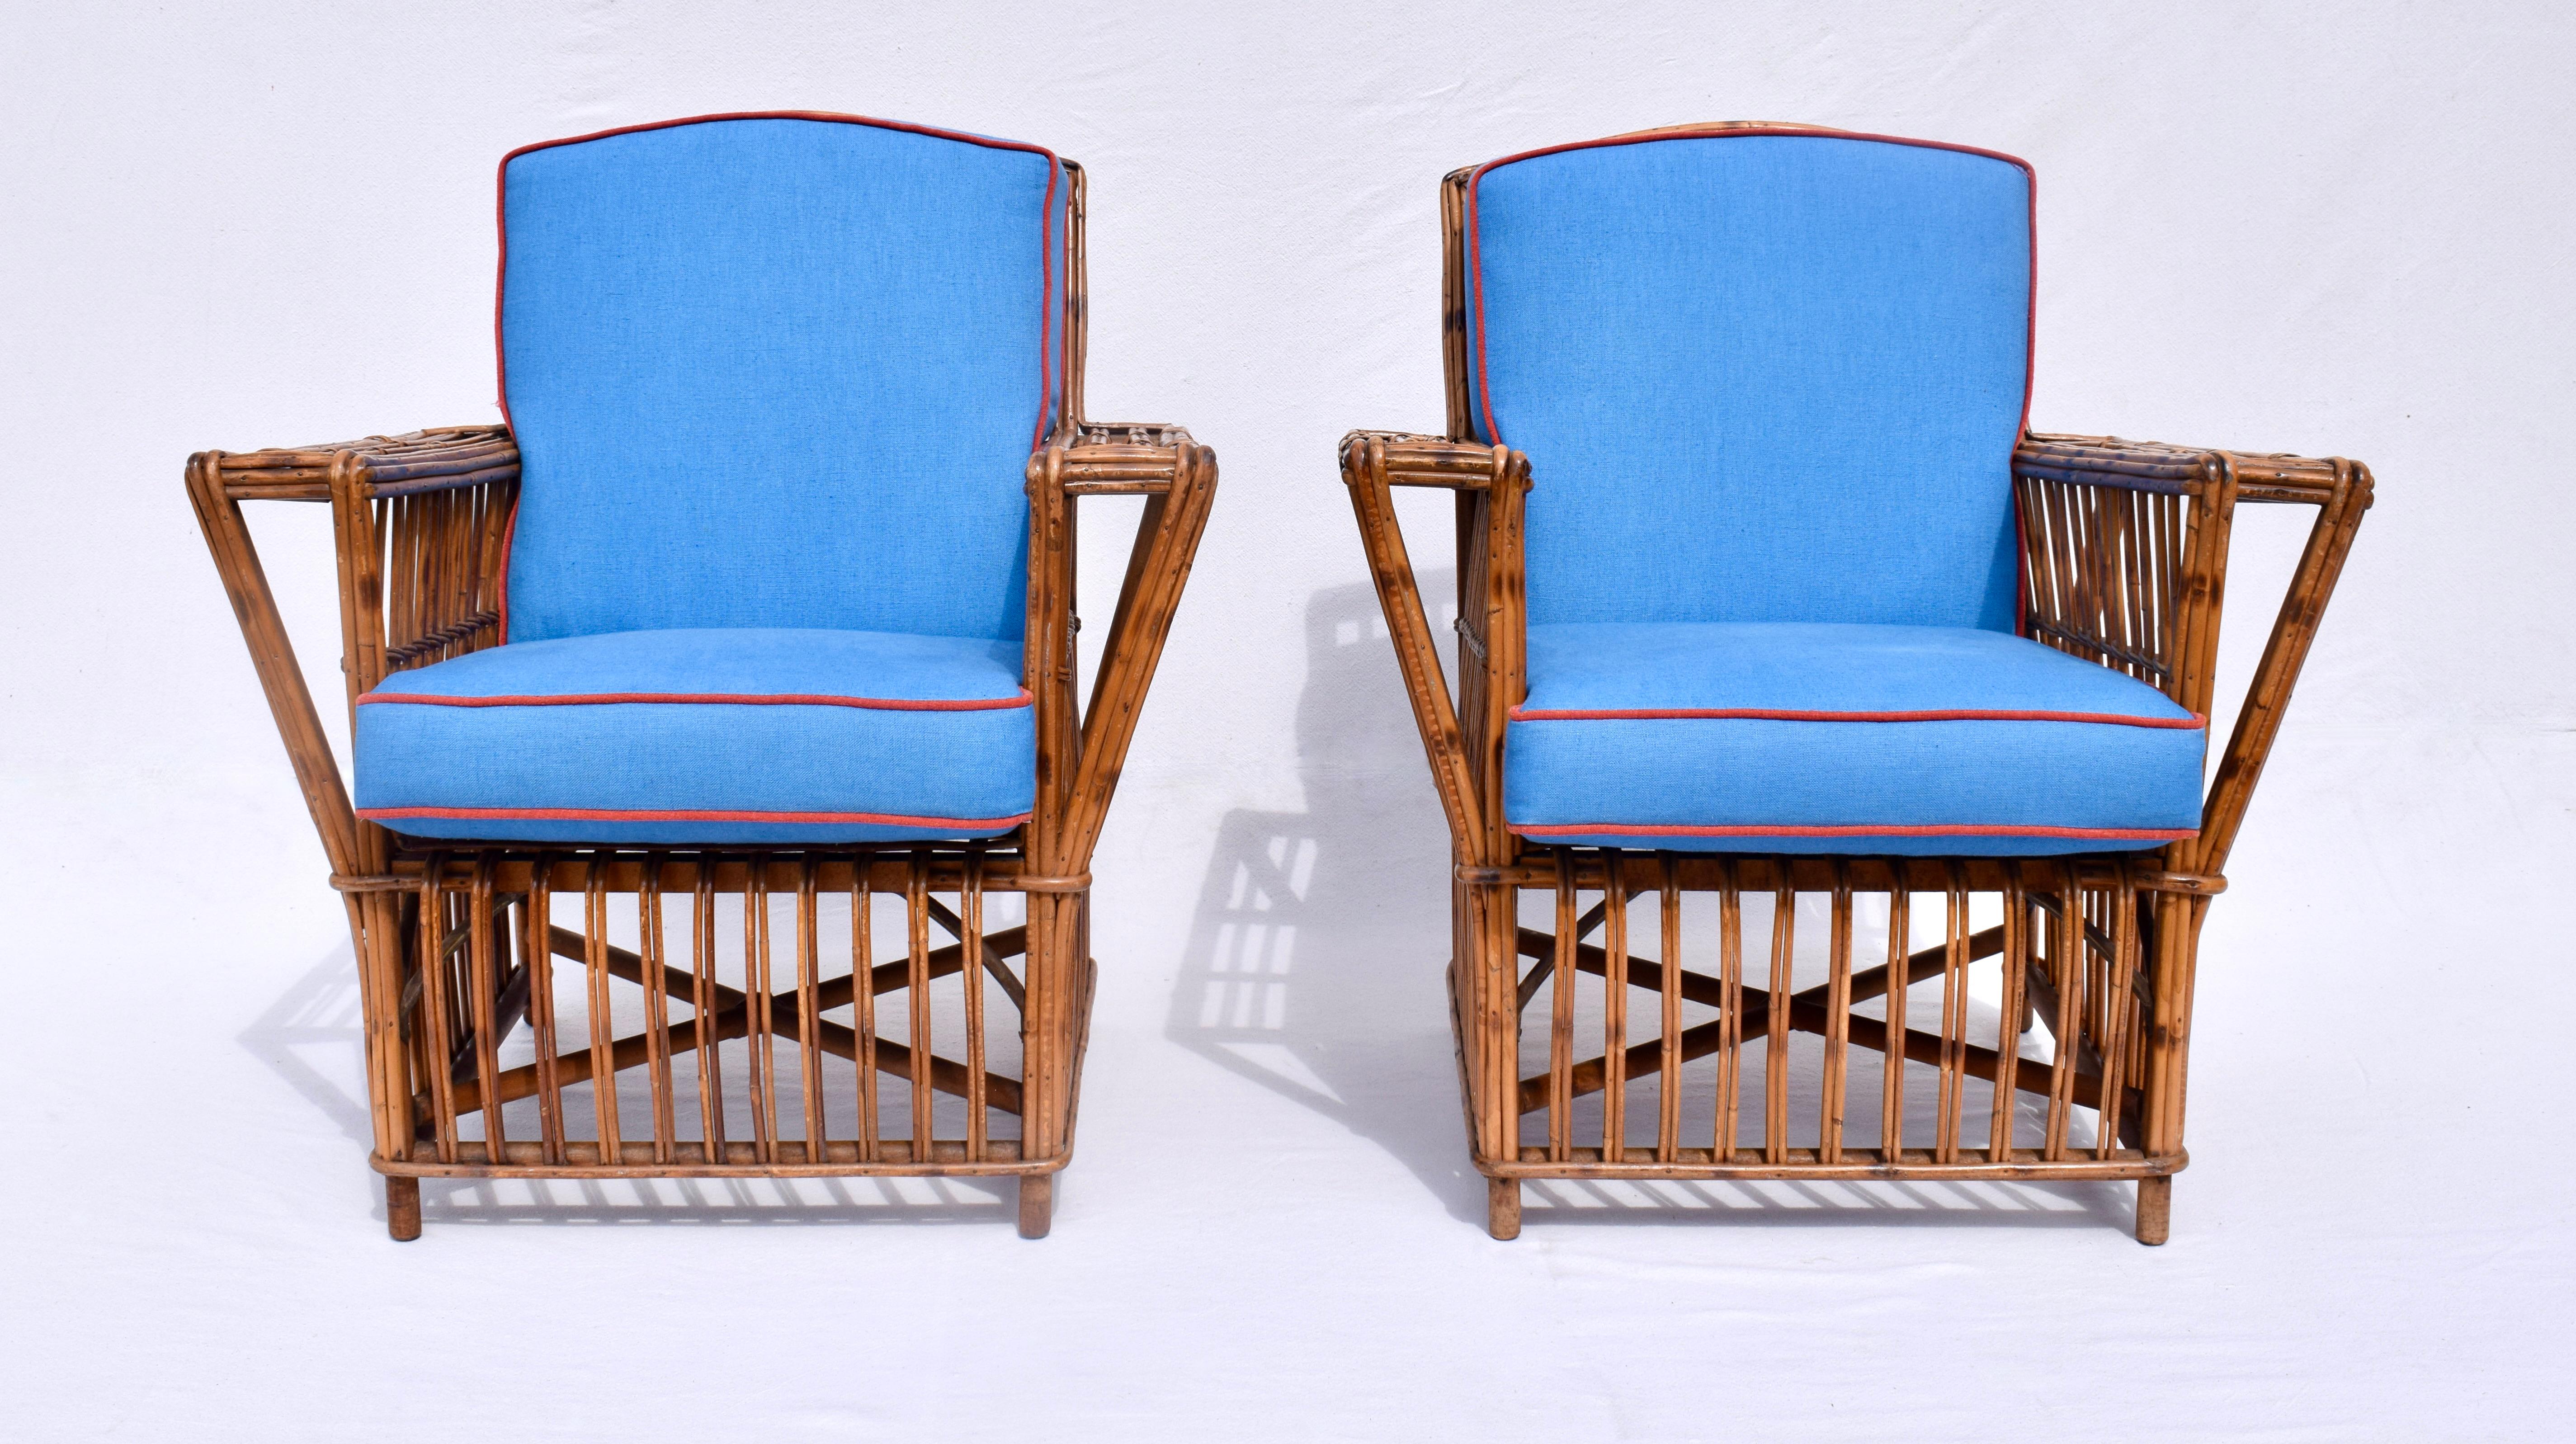 A pair of early 20th c. stick wicker reed rattan lounge chairs with original natural chestnut finish & new custom cushions.  Nice mid size exquisitely maintained & fully hand detailed ready for use. Seat / Arm Dimensions: 18